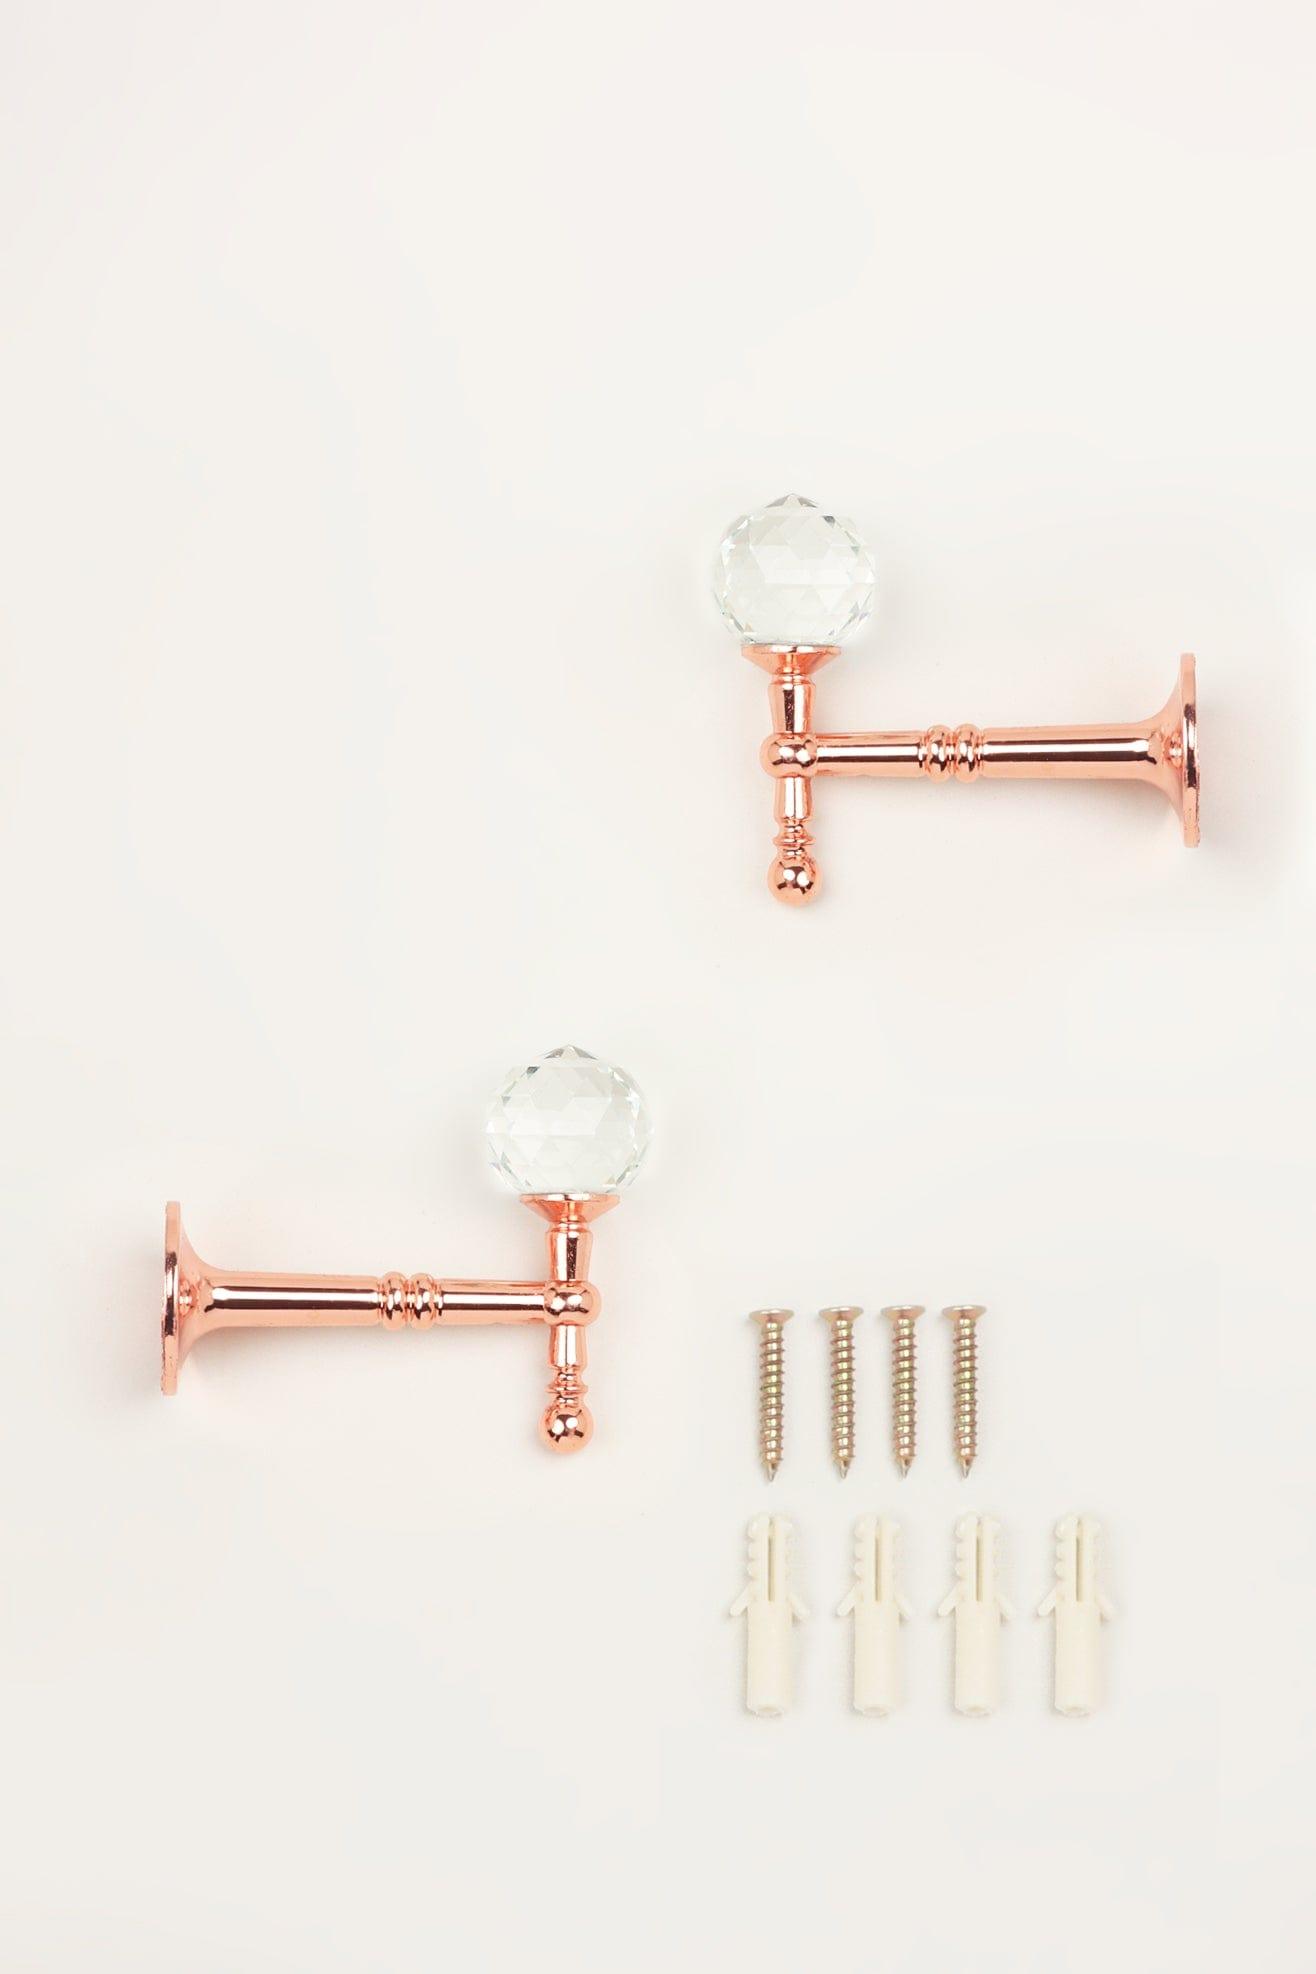 G Decor All Hooks Rose Gold Pack of 2 Faceted Crystal Curtain Tie Backs, Rose Gold Finish